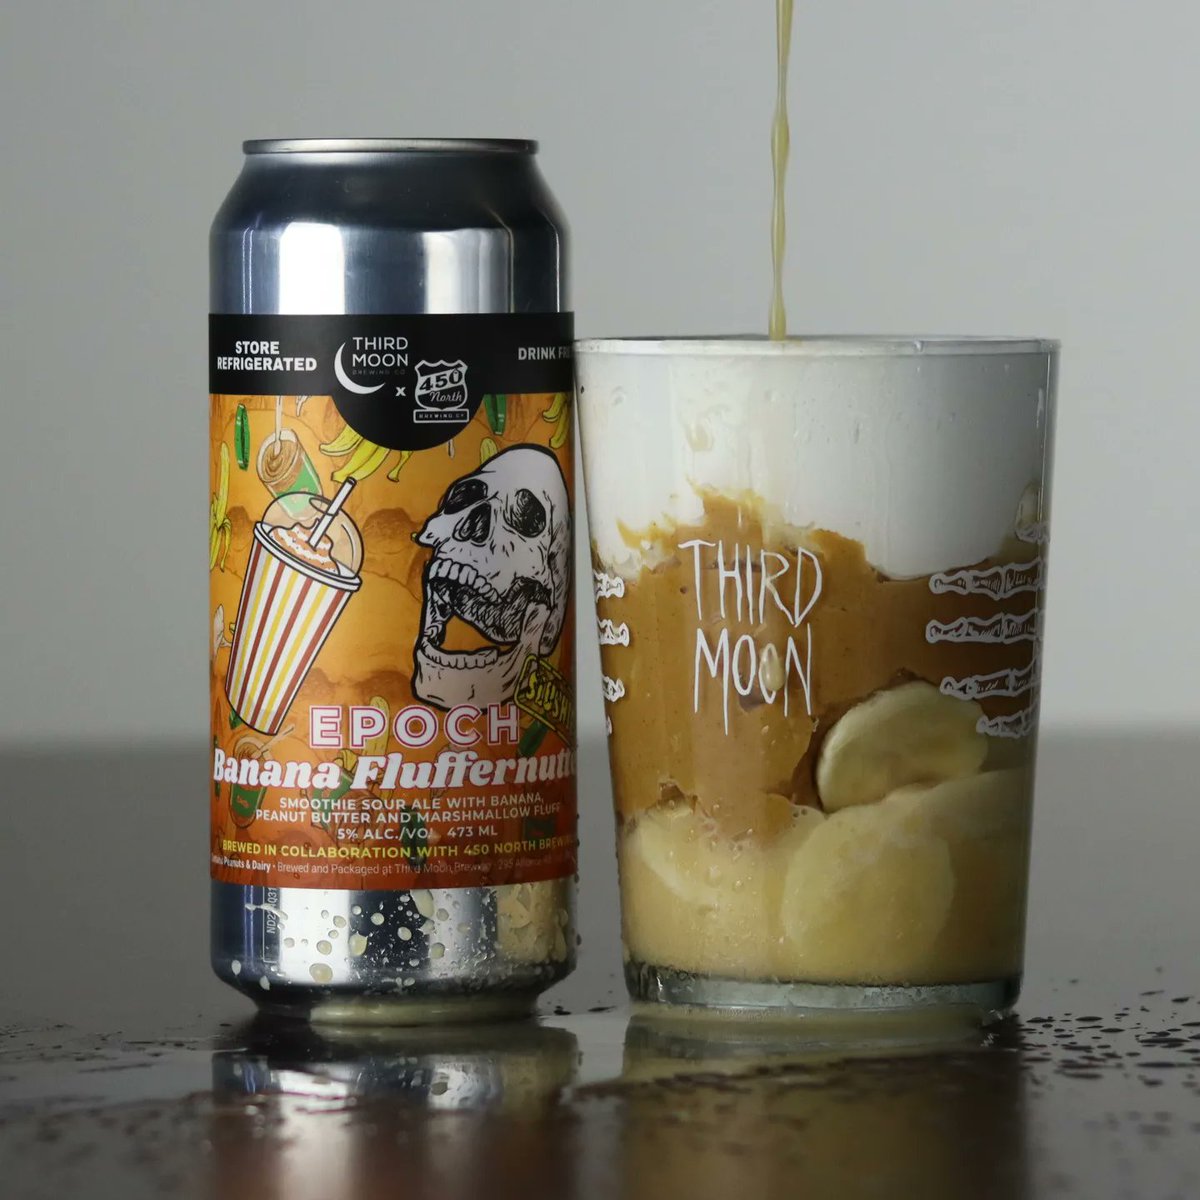 First up this week we have a collaboration with 450 North Brewing Co from Columbus, Indiana - Banana Fluffernutter Epoch Slushie! See our Instagram for full details 🍻